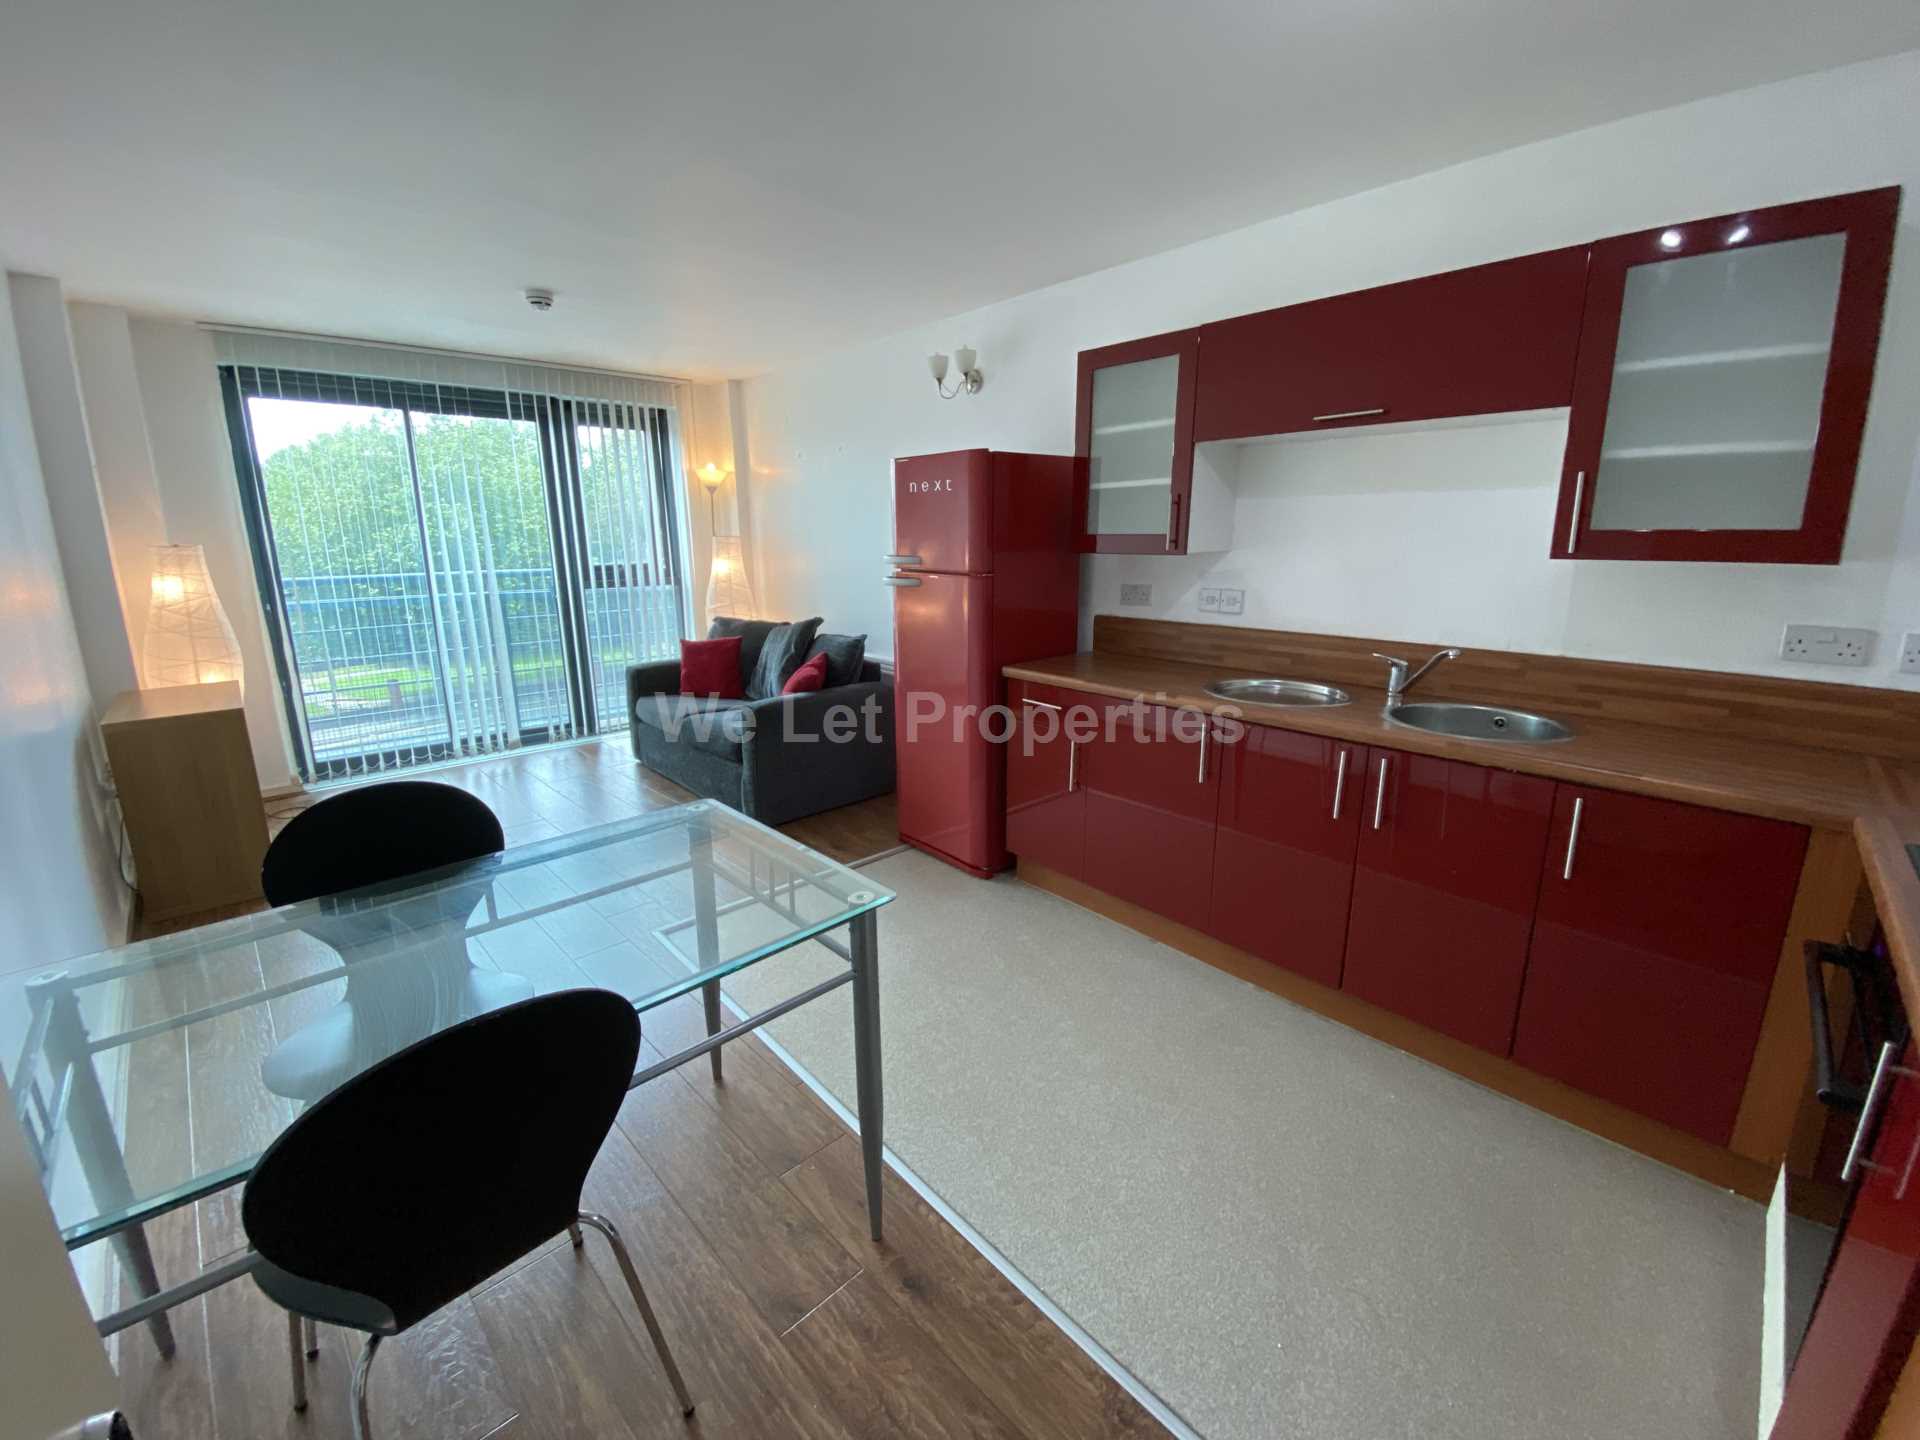 1 bed Apartment for rent in Manchester. From We Let Properties - Manchester